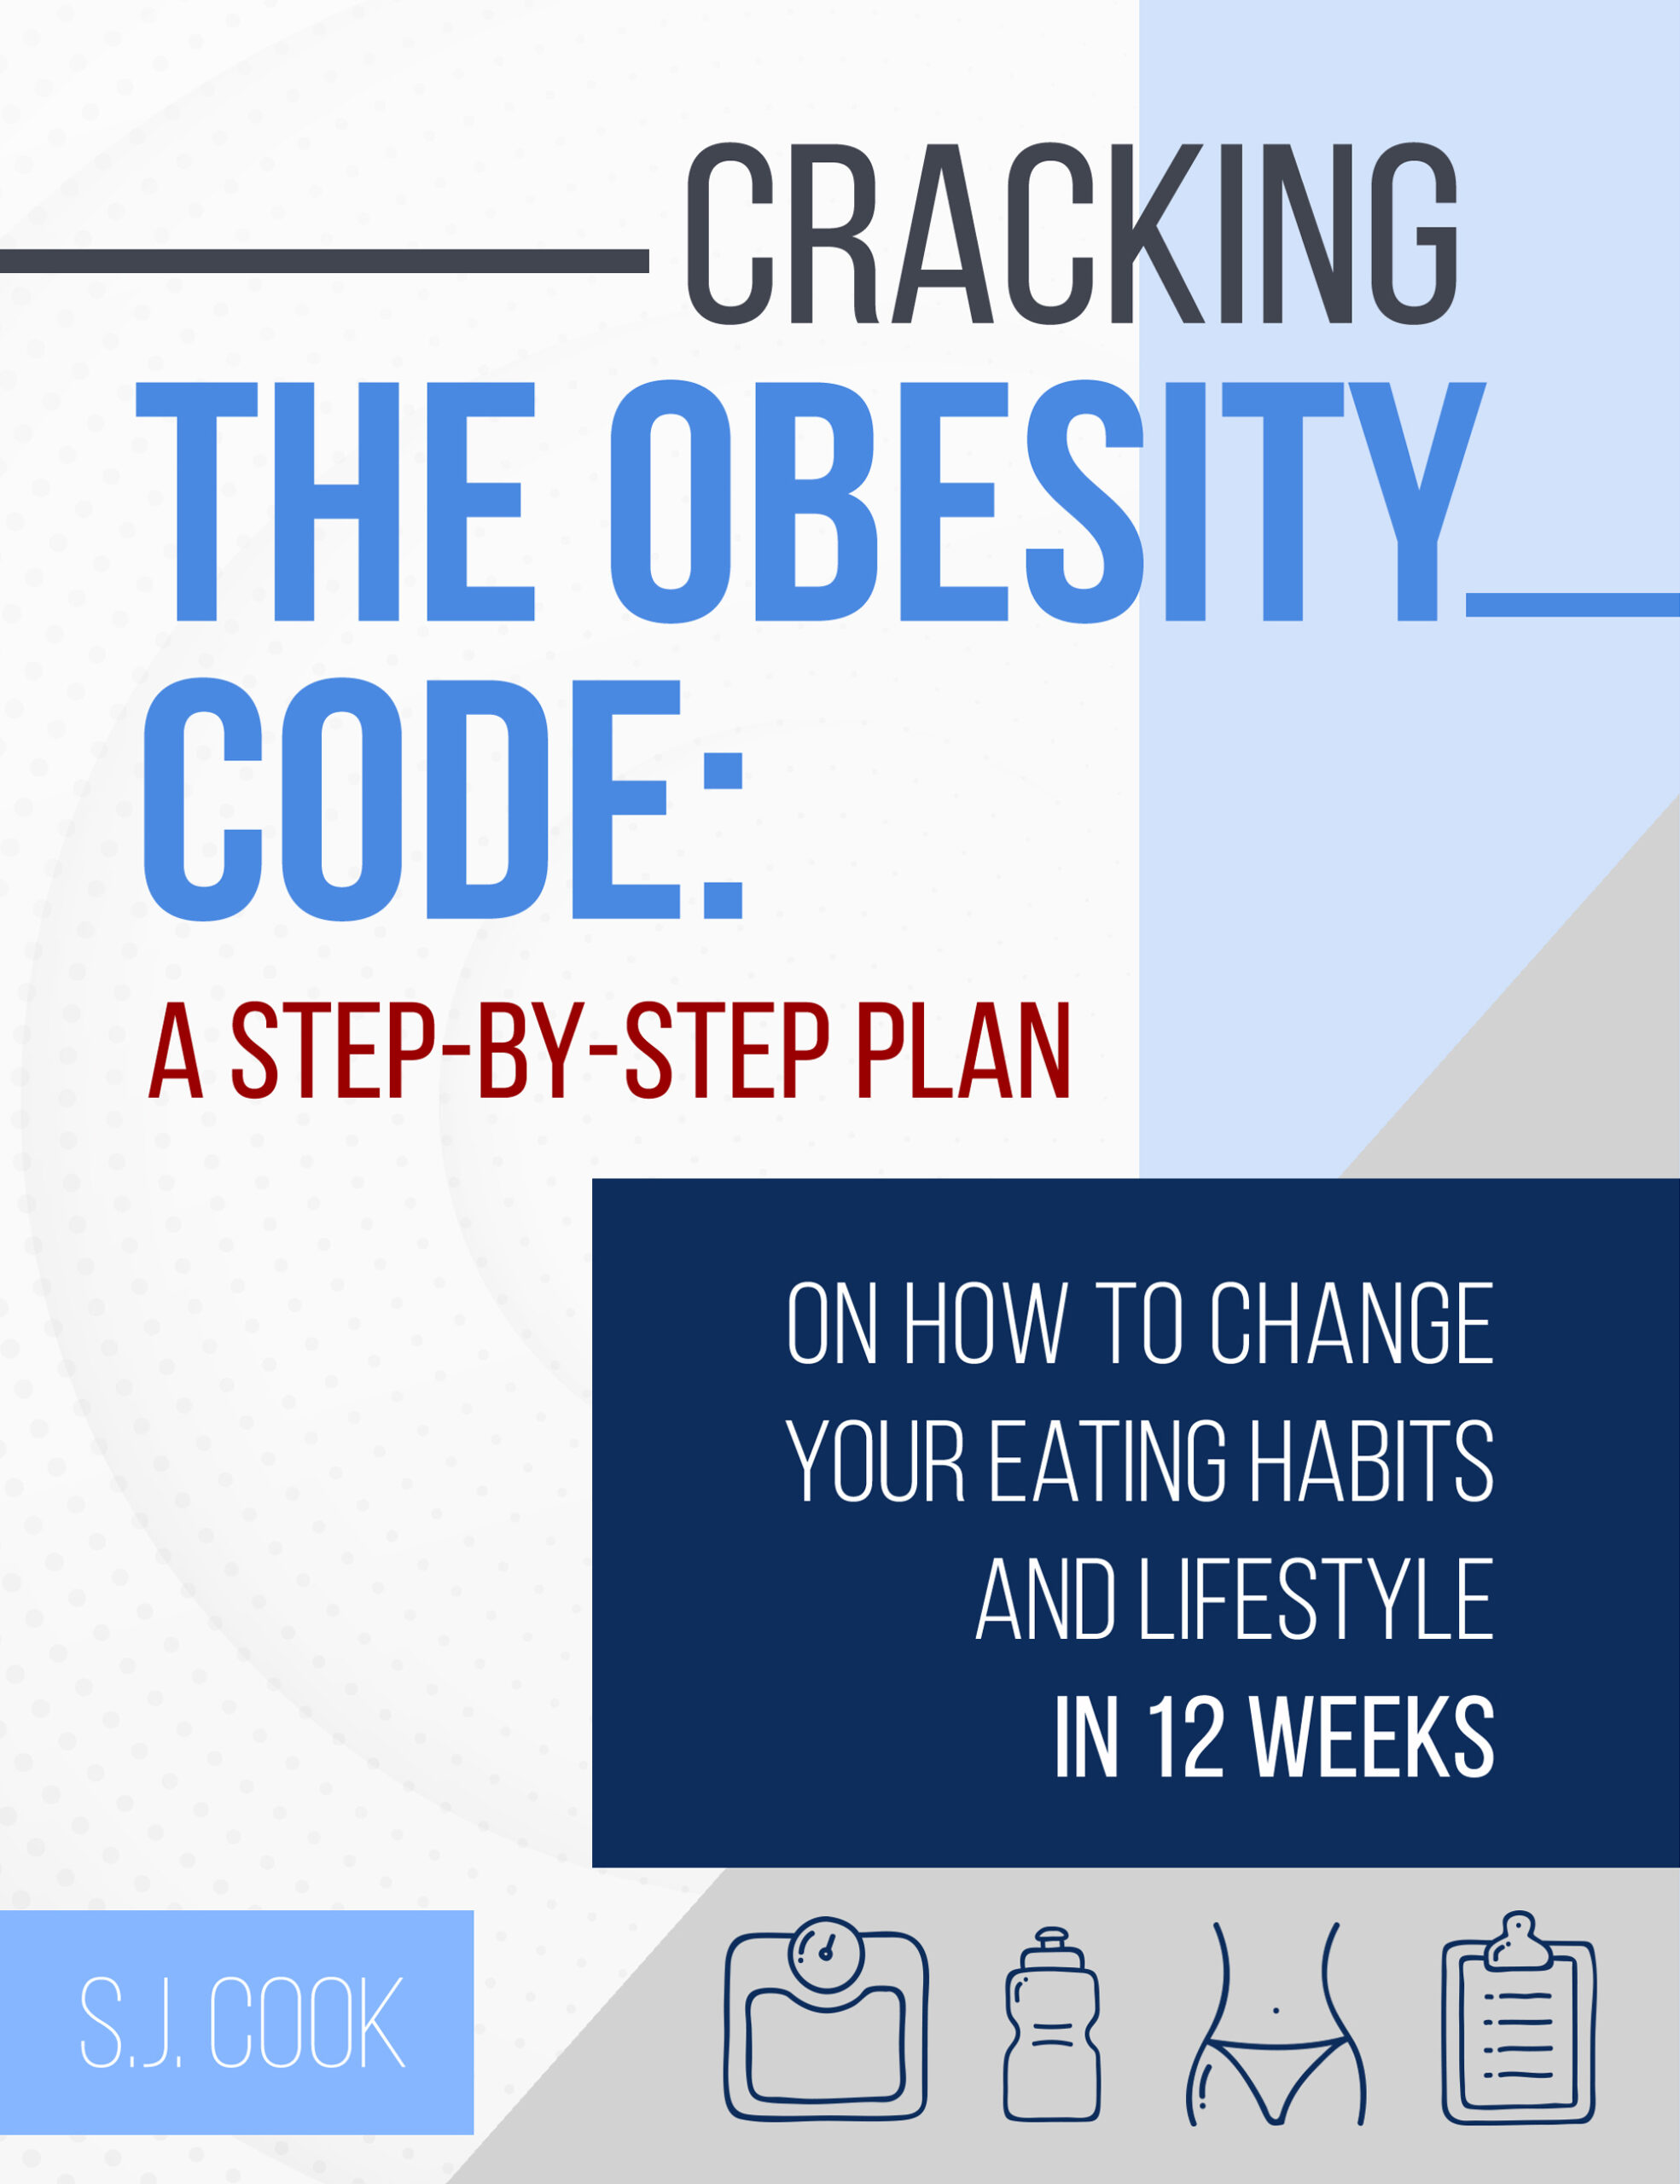 FREE: Cracking The Obesity Code: A Step-by-Step Plan on How to Change Your Eating Habits and Lifestyle in 12 weeks by S.J. Cook